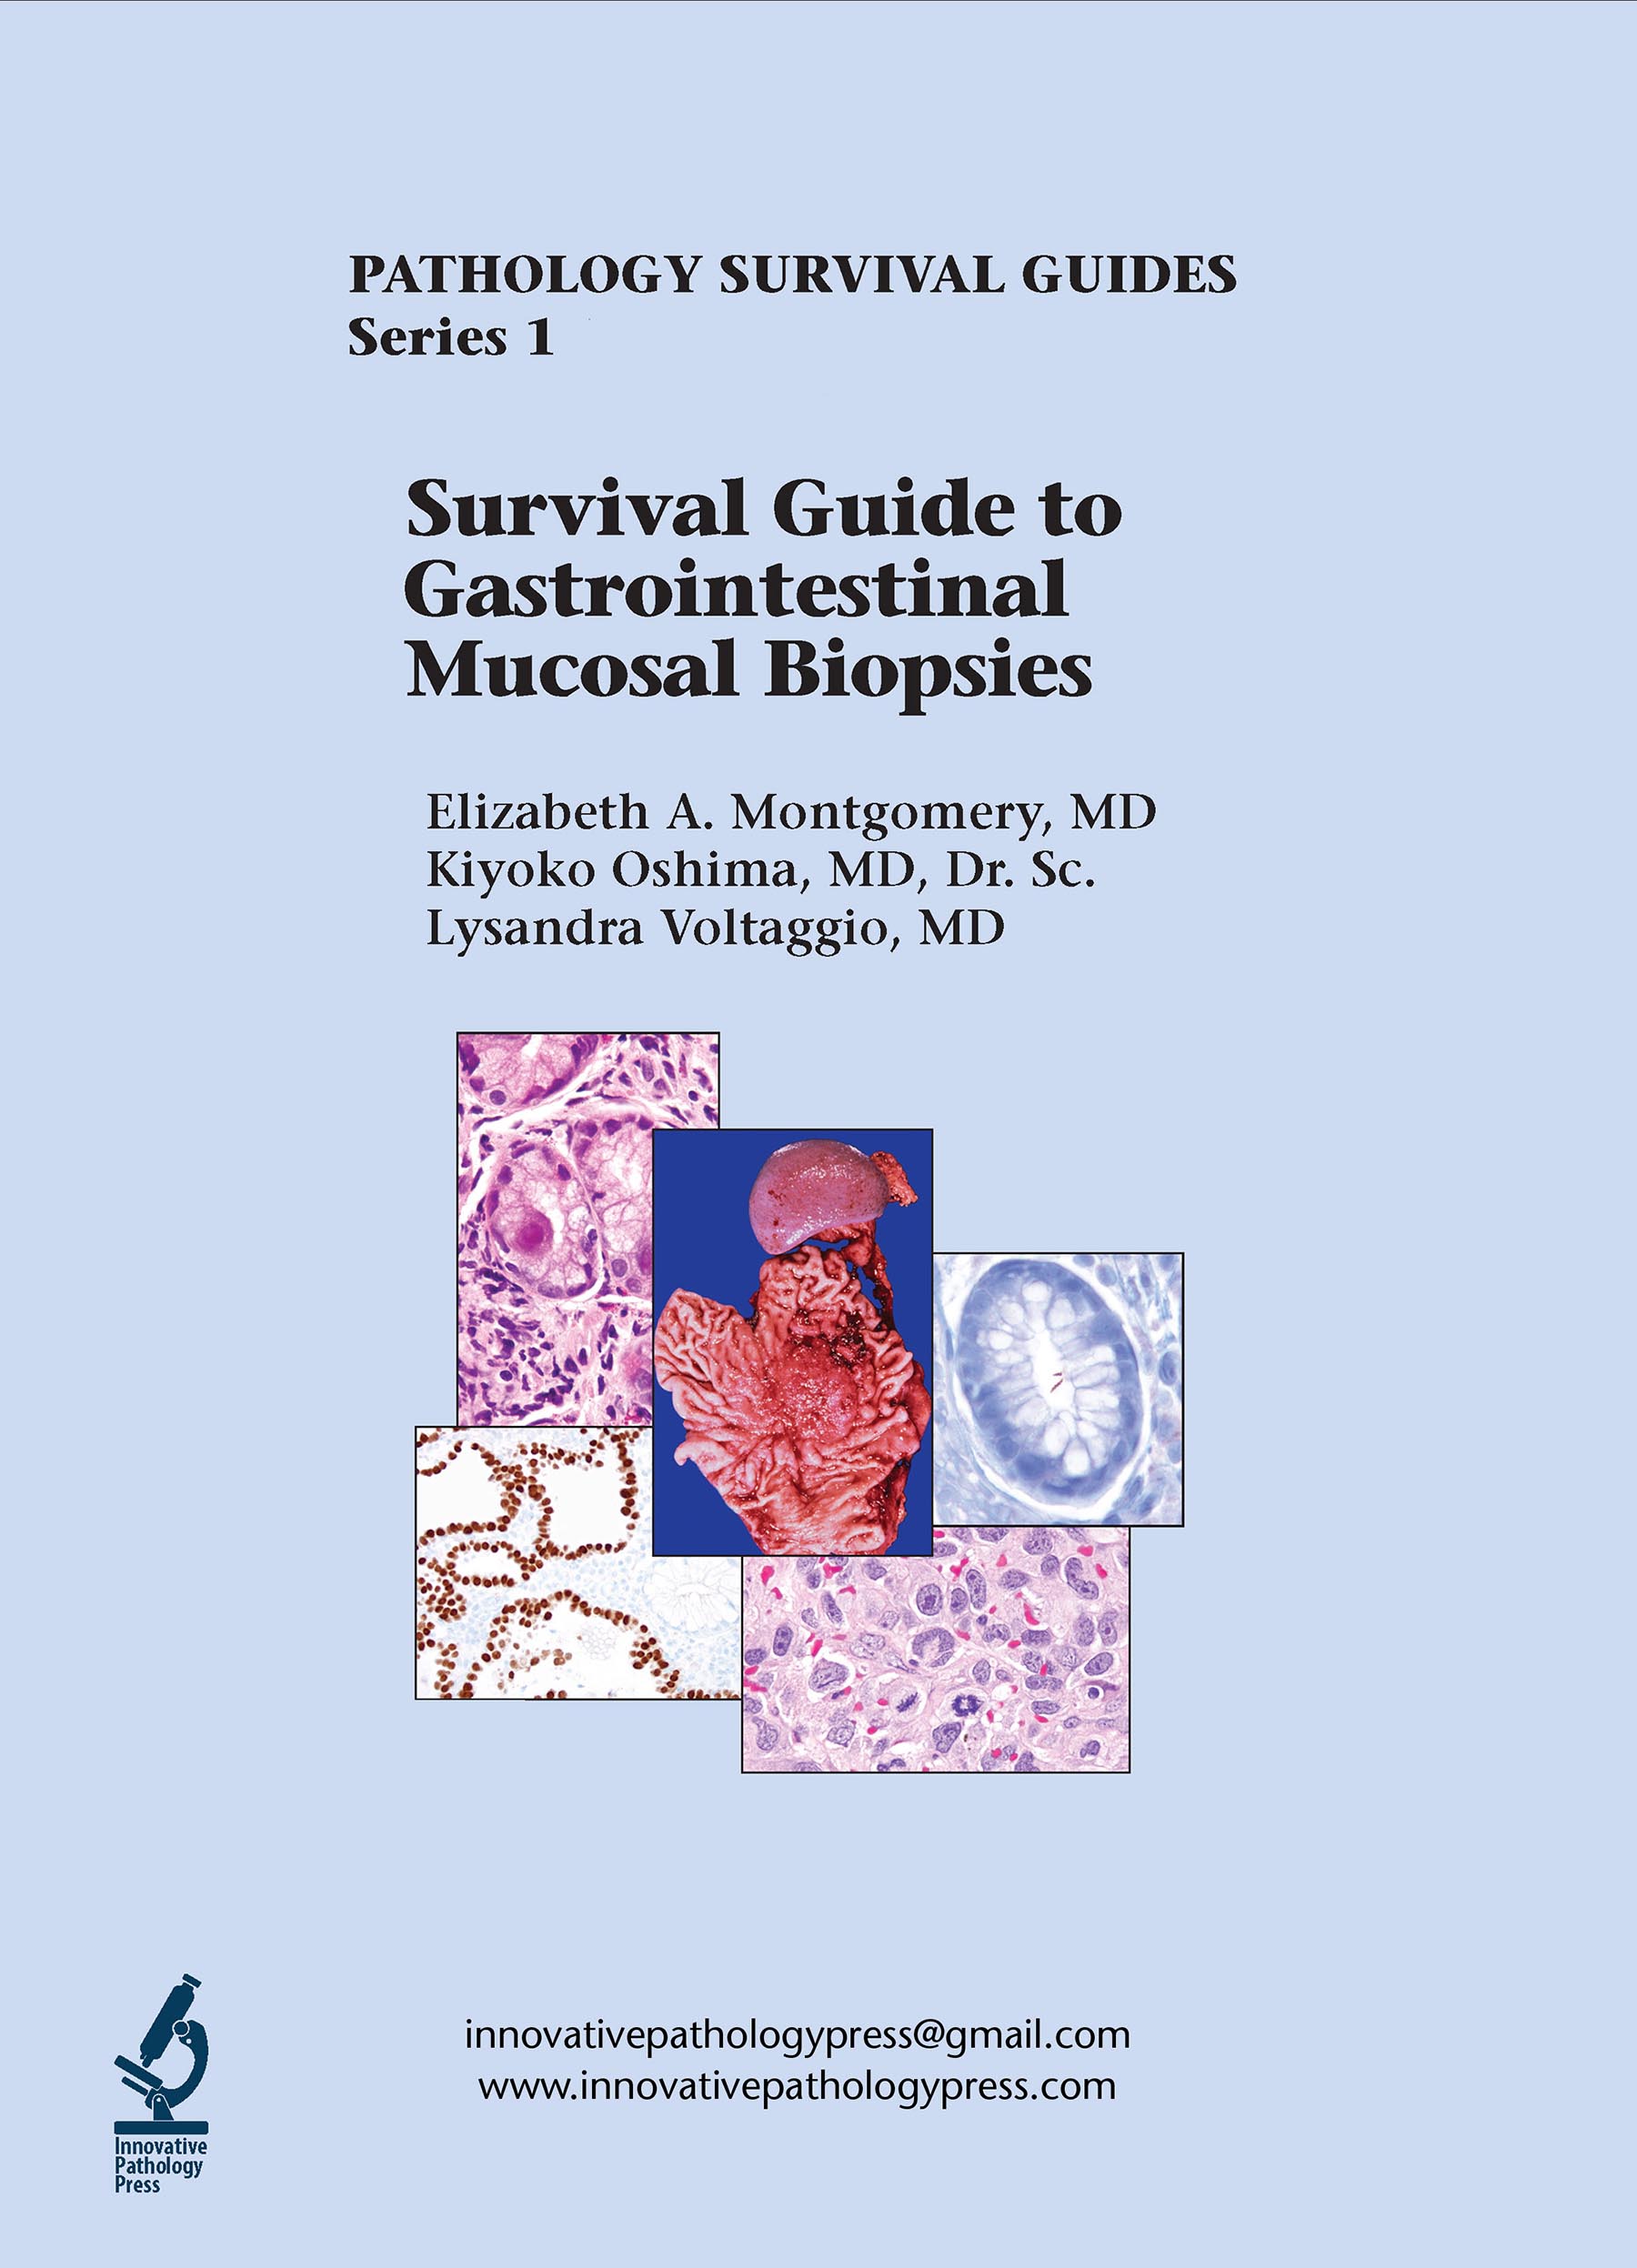 Pathology Survival Guides, Series 1Vol.1: Survival Guide to Gastrointestinal Mucosal